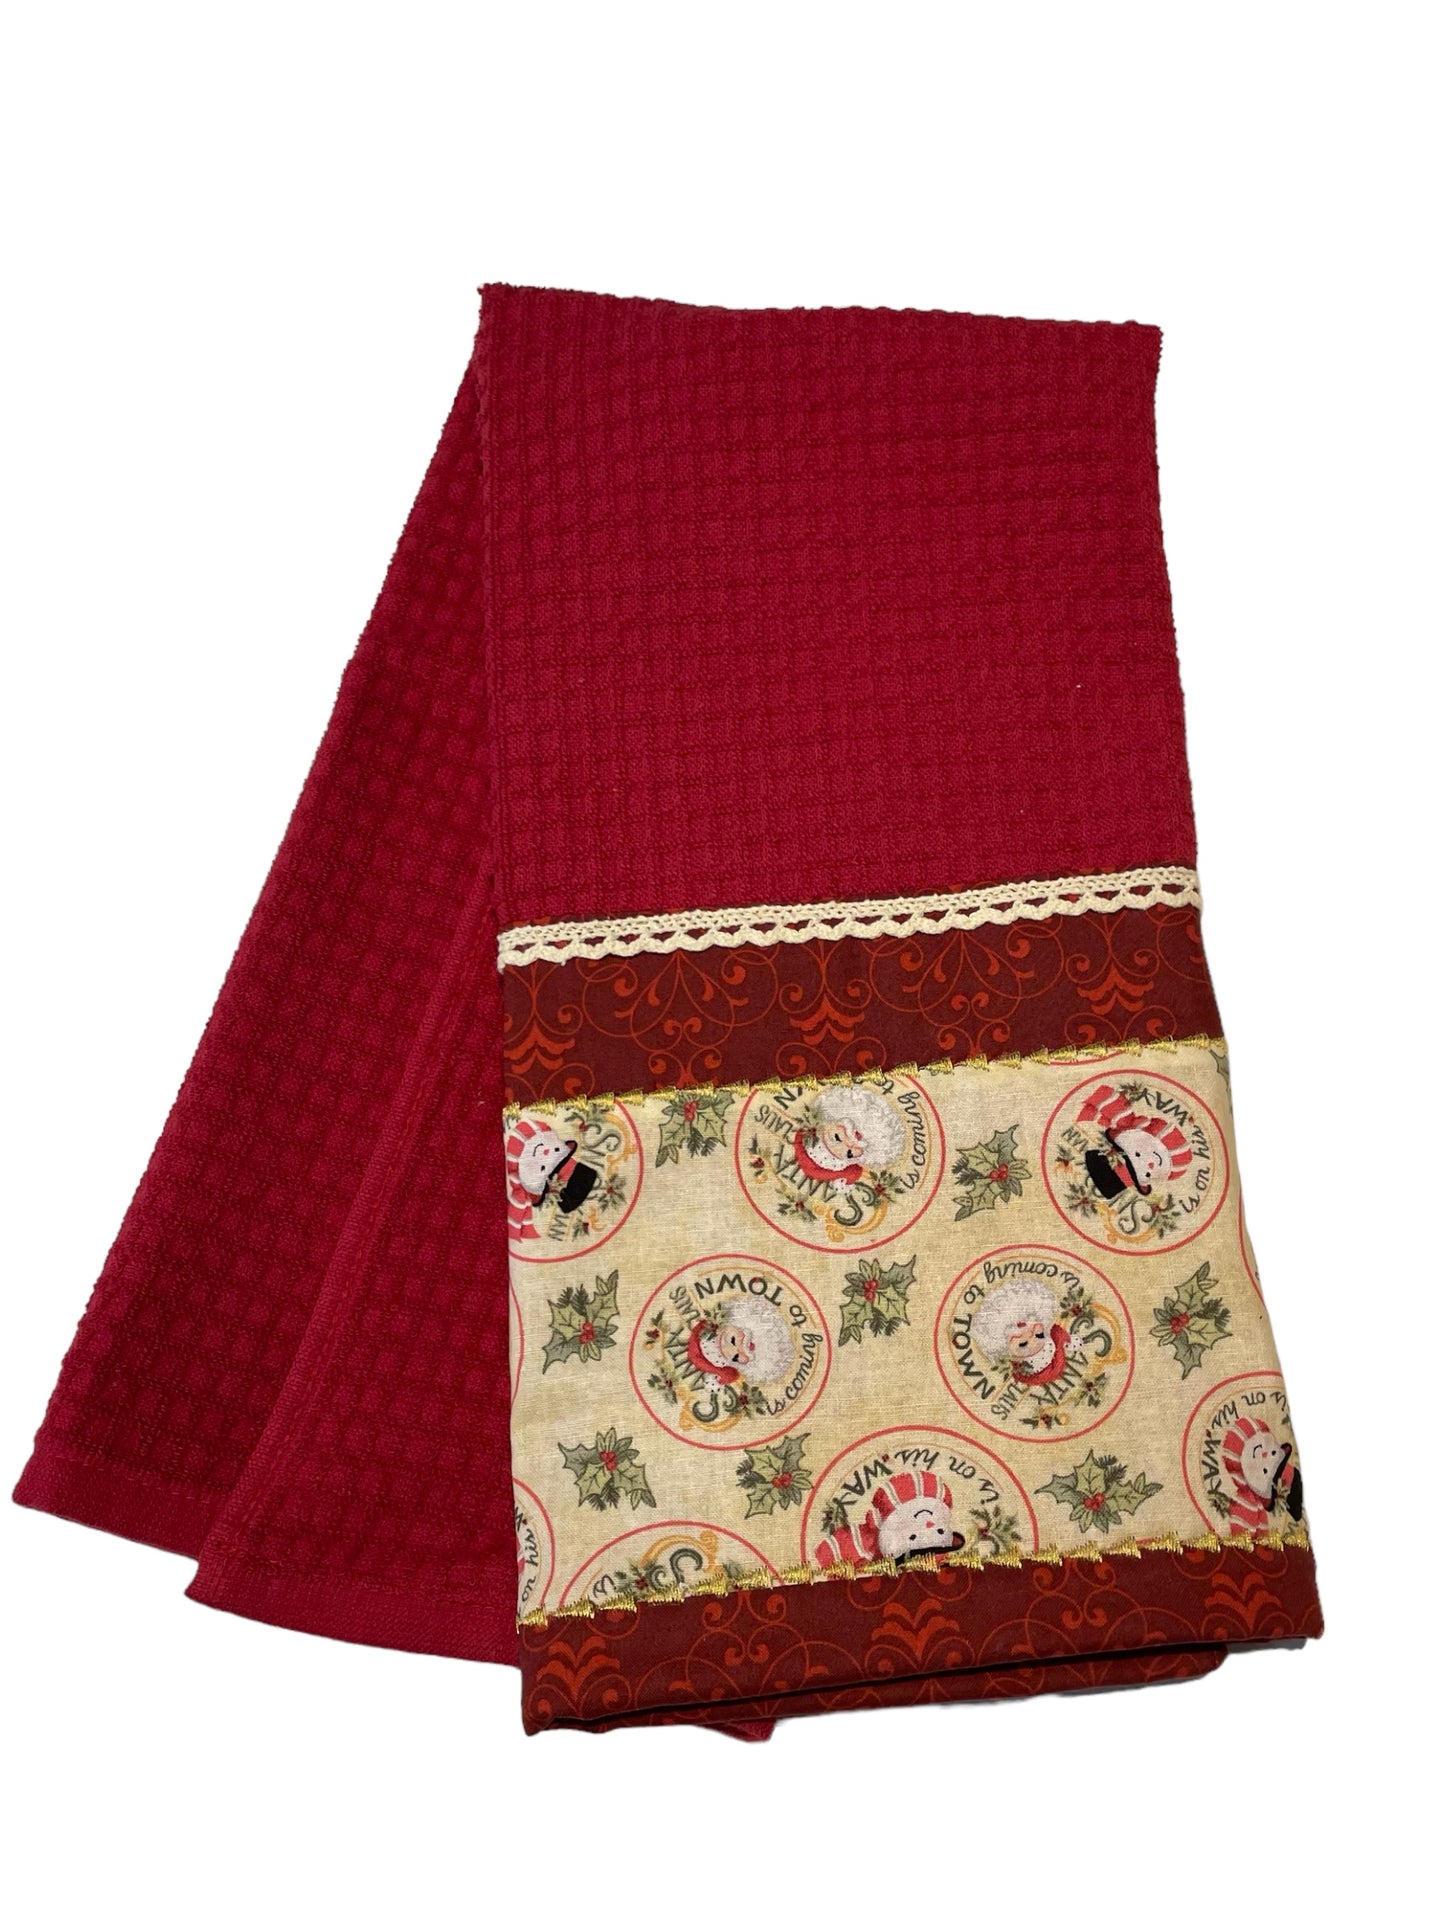 Vintage Santa-Themed Red Christmas Dish Towel with Handcrafted Details